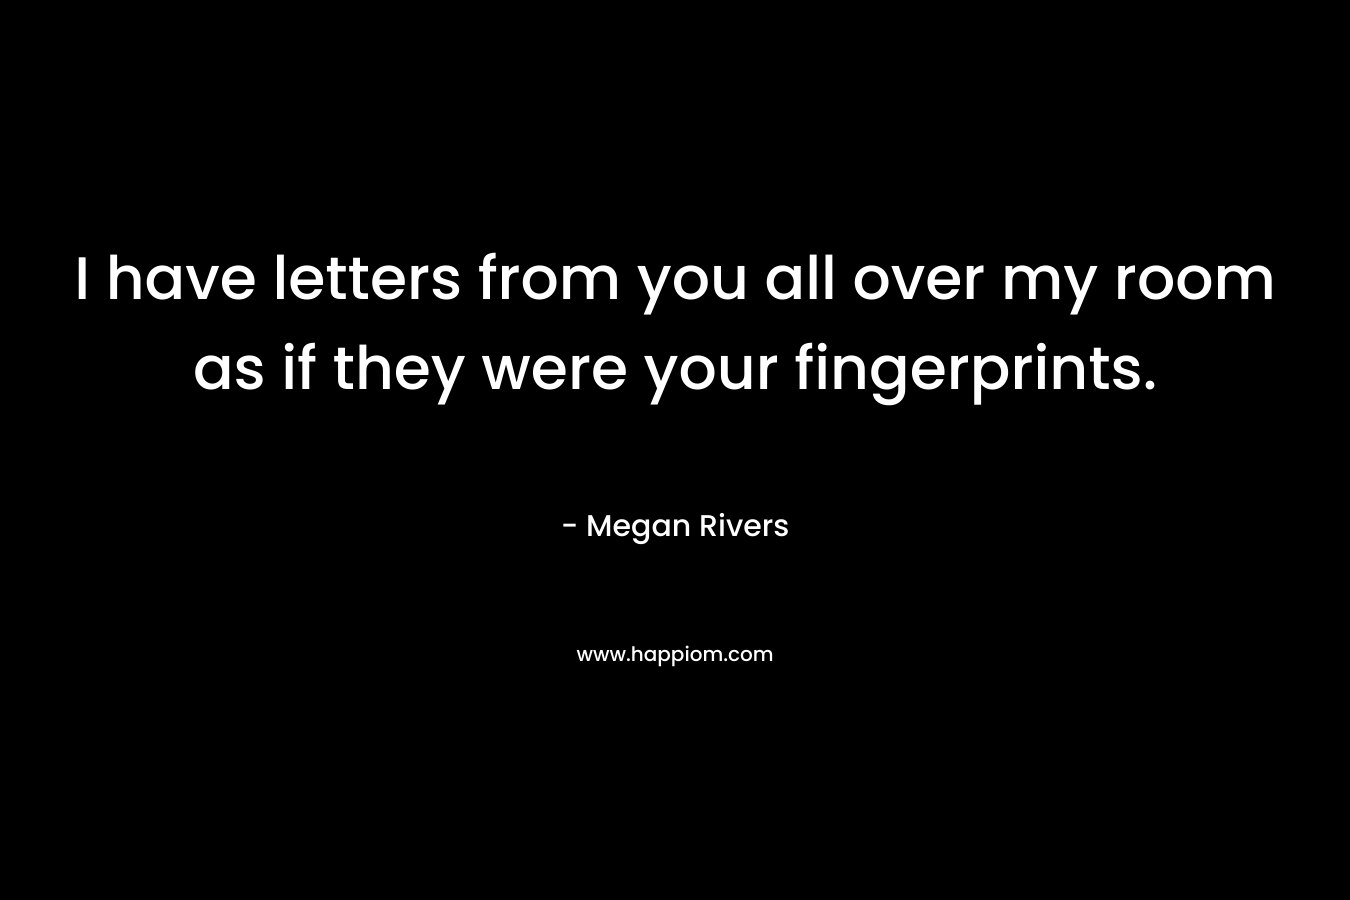 I have letters from you all over my room as if they were your fingerprints.